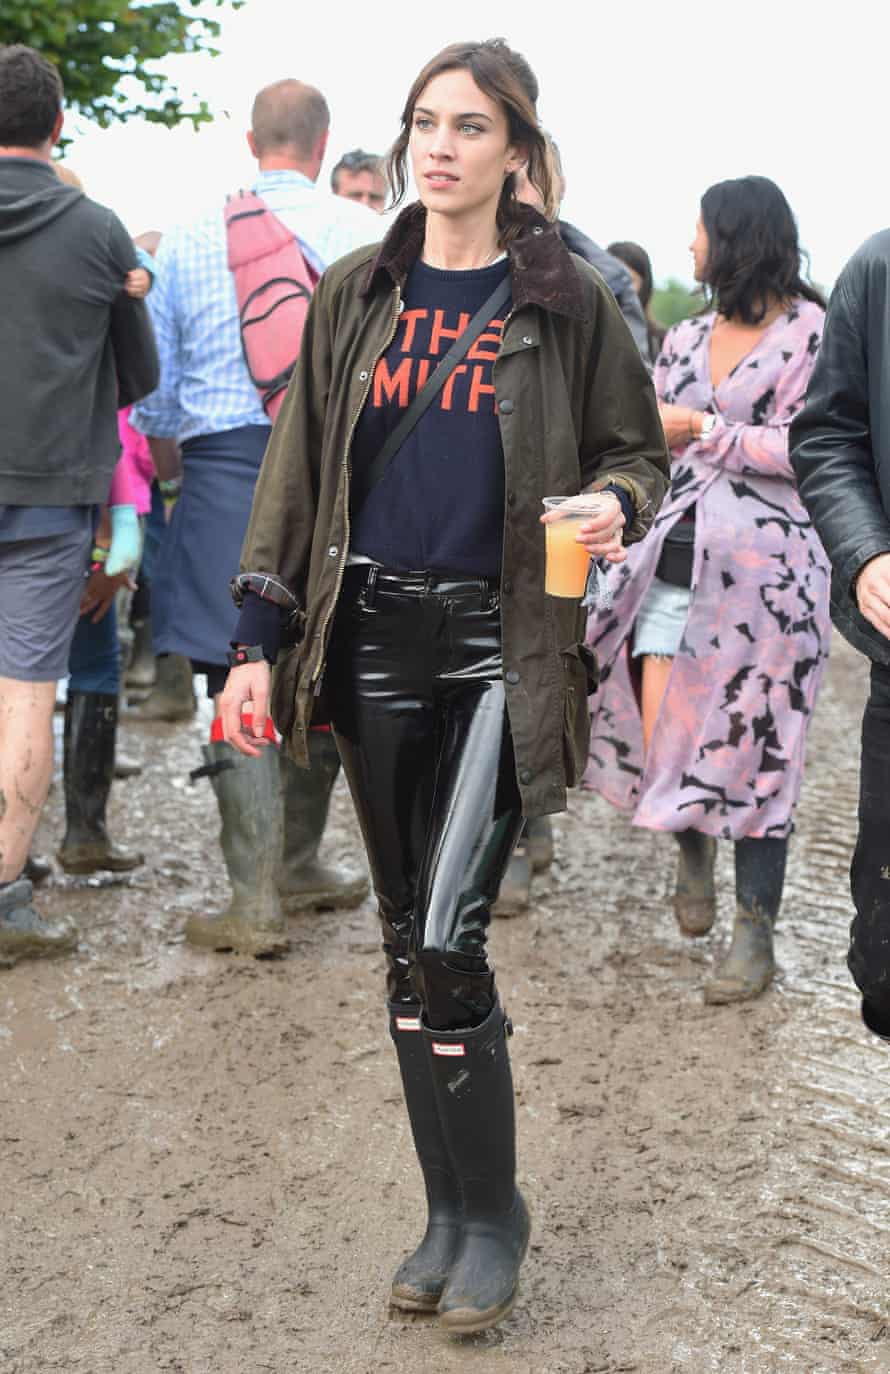 A Chung staple: the waxed jacket at Glastonbury this year.